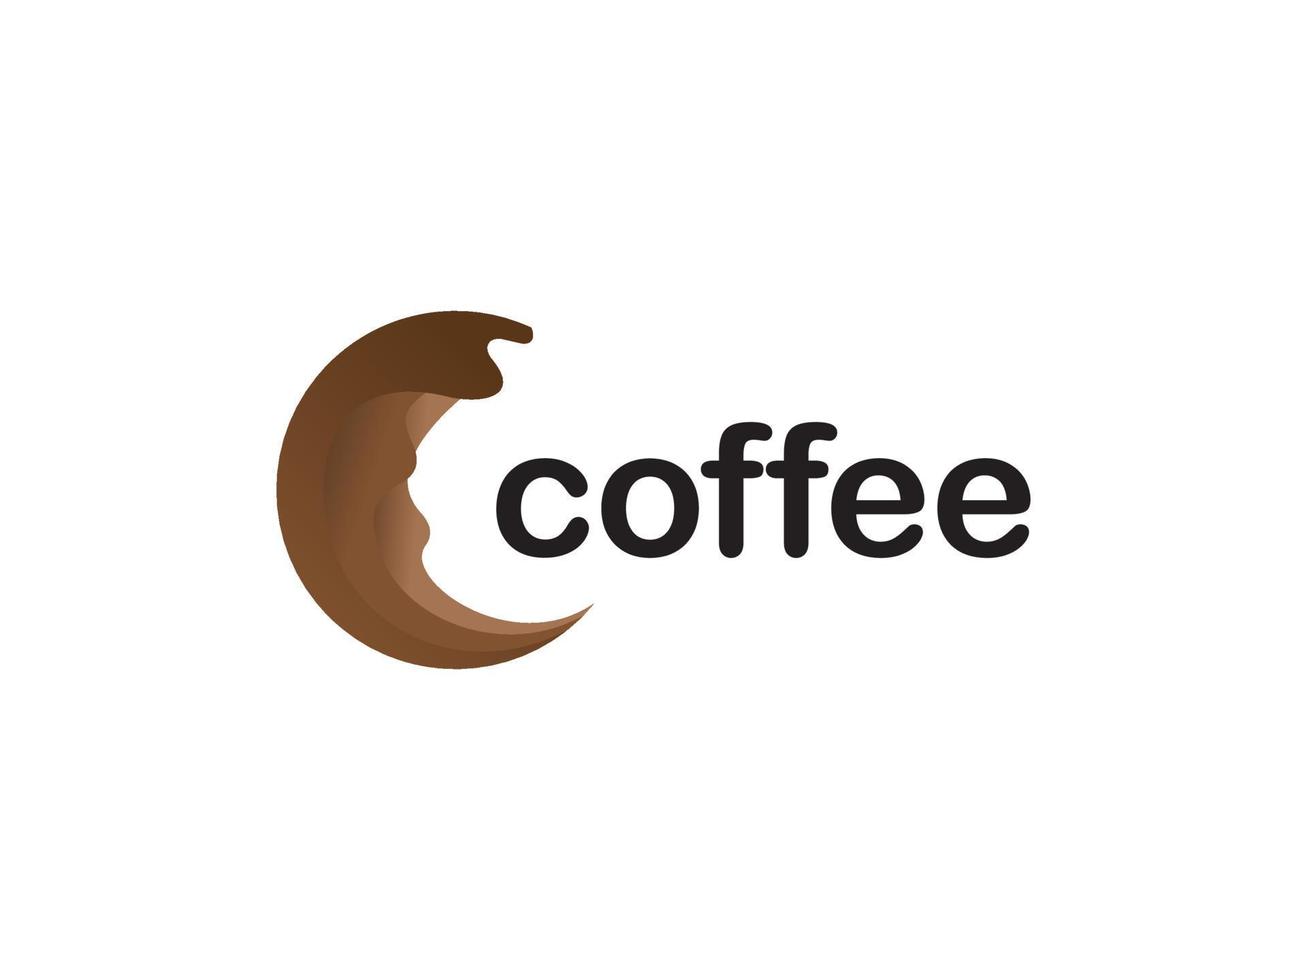 Modern and simplistic coffee bean design. The logo is the perfect choice for a cafe business. coffee shop vector